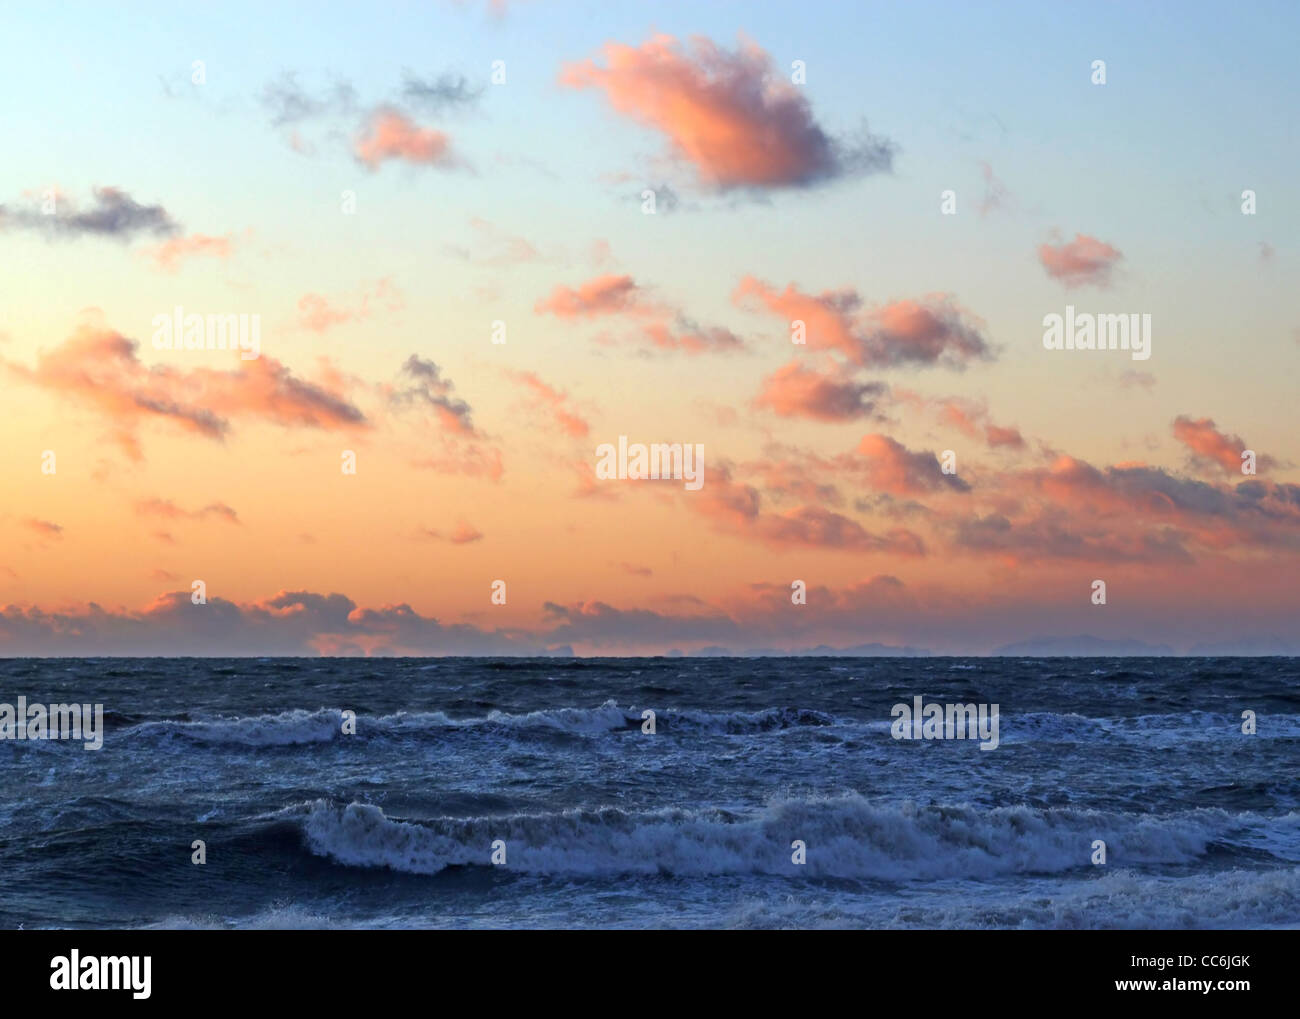 Interesting orange clouds at sunset over the ocean waves. Stock Photo